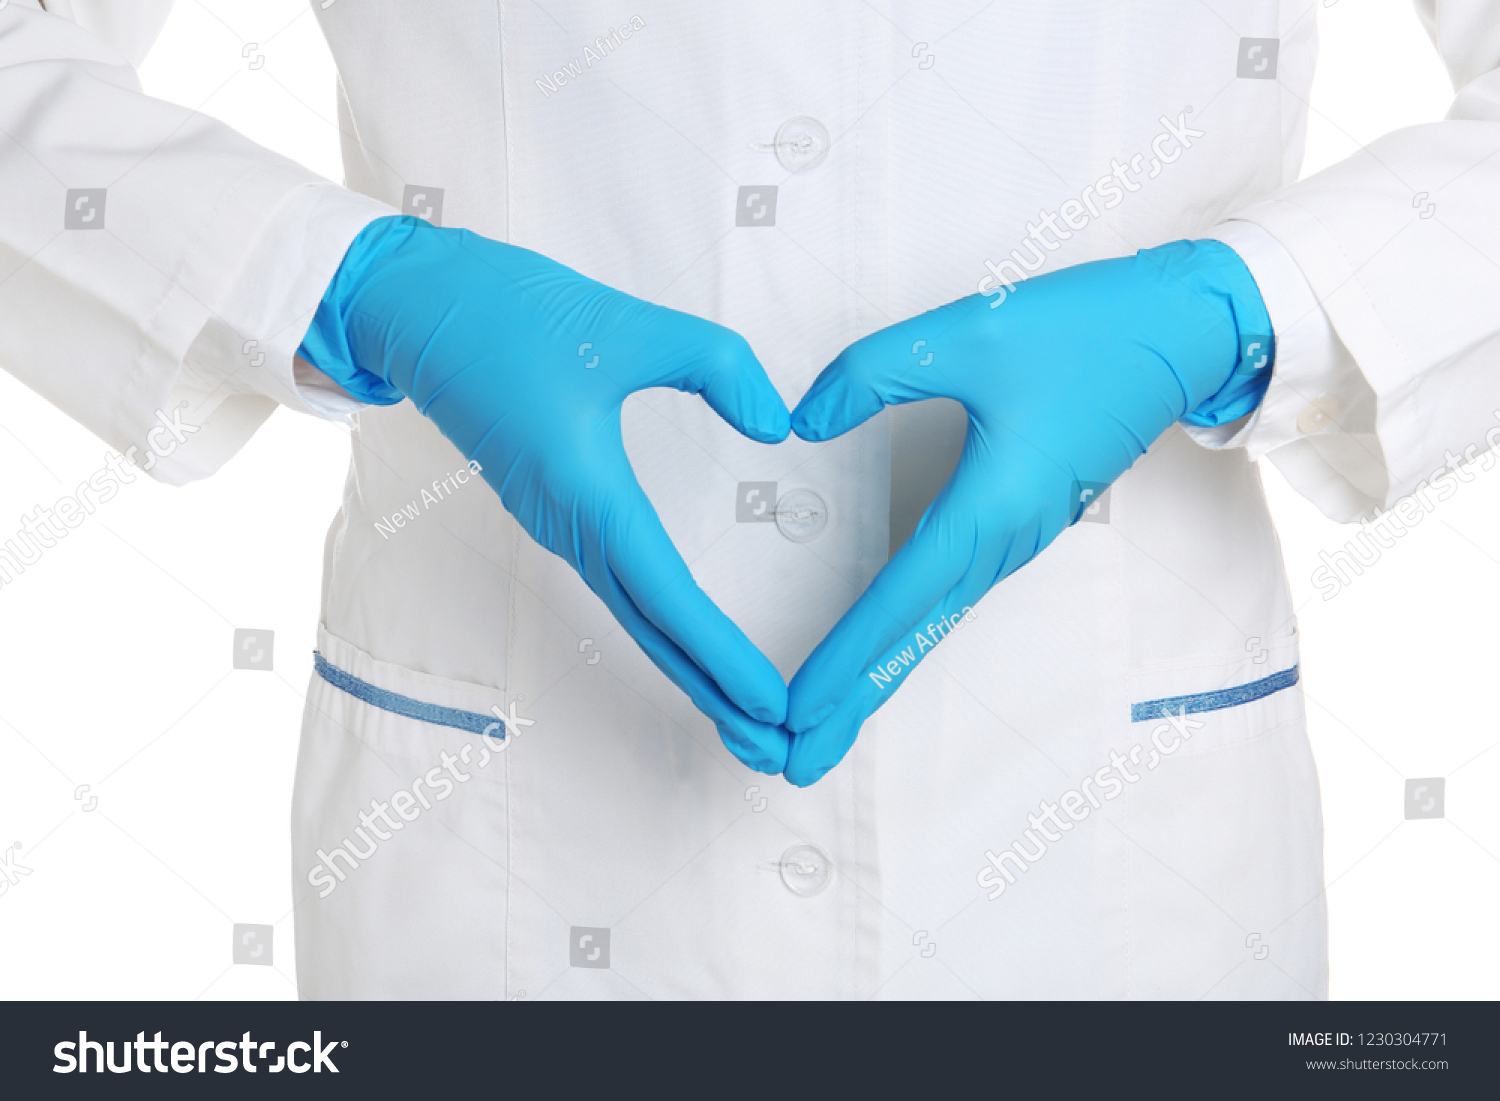 Doctor making heart shape with hands in medical gloves on white background #1230304771